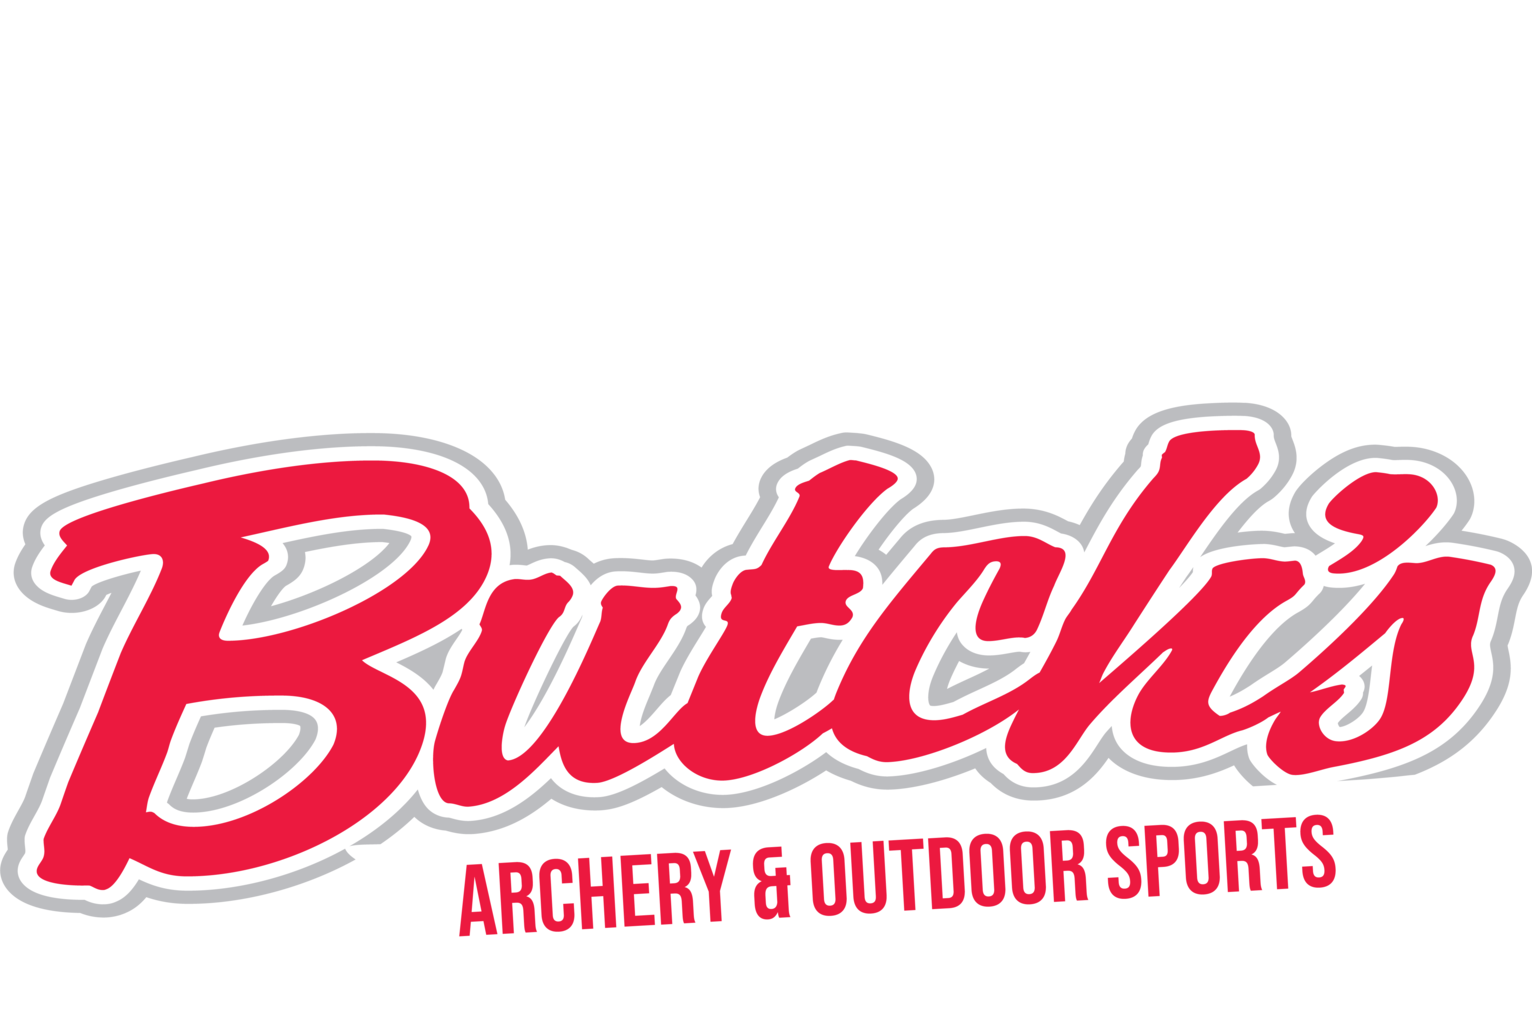 Butch's Archery & Outdoor Sports